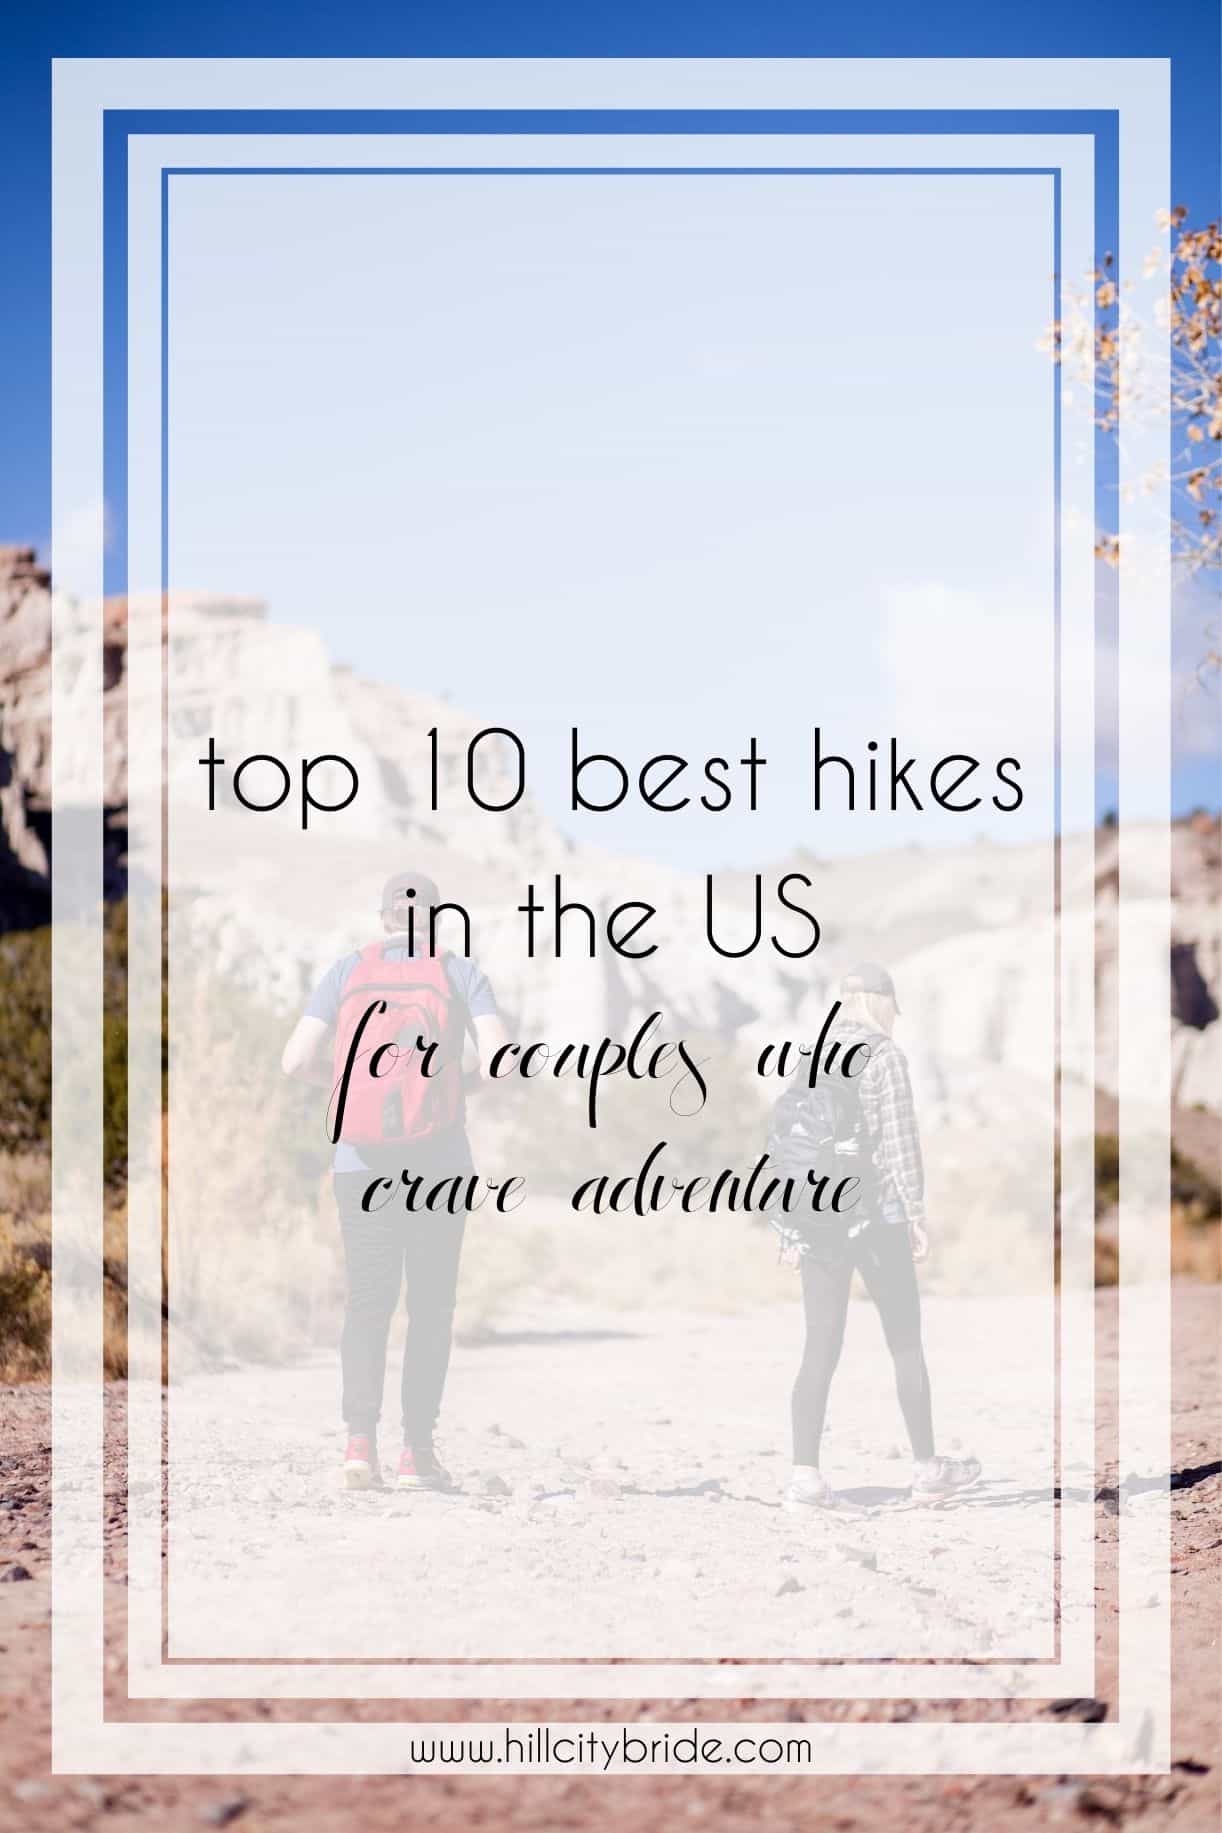 Top 10 Best Hikes in the US for Couples Who Crave Adventure